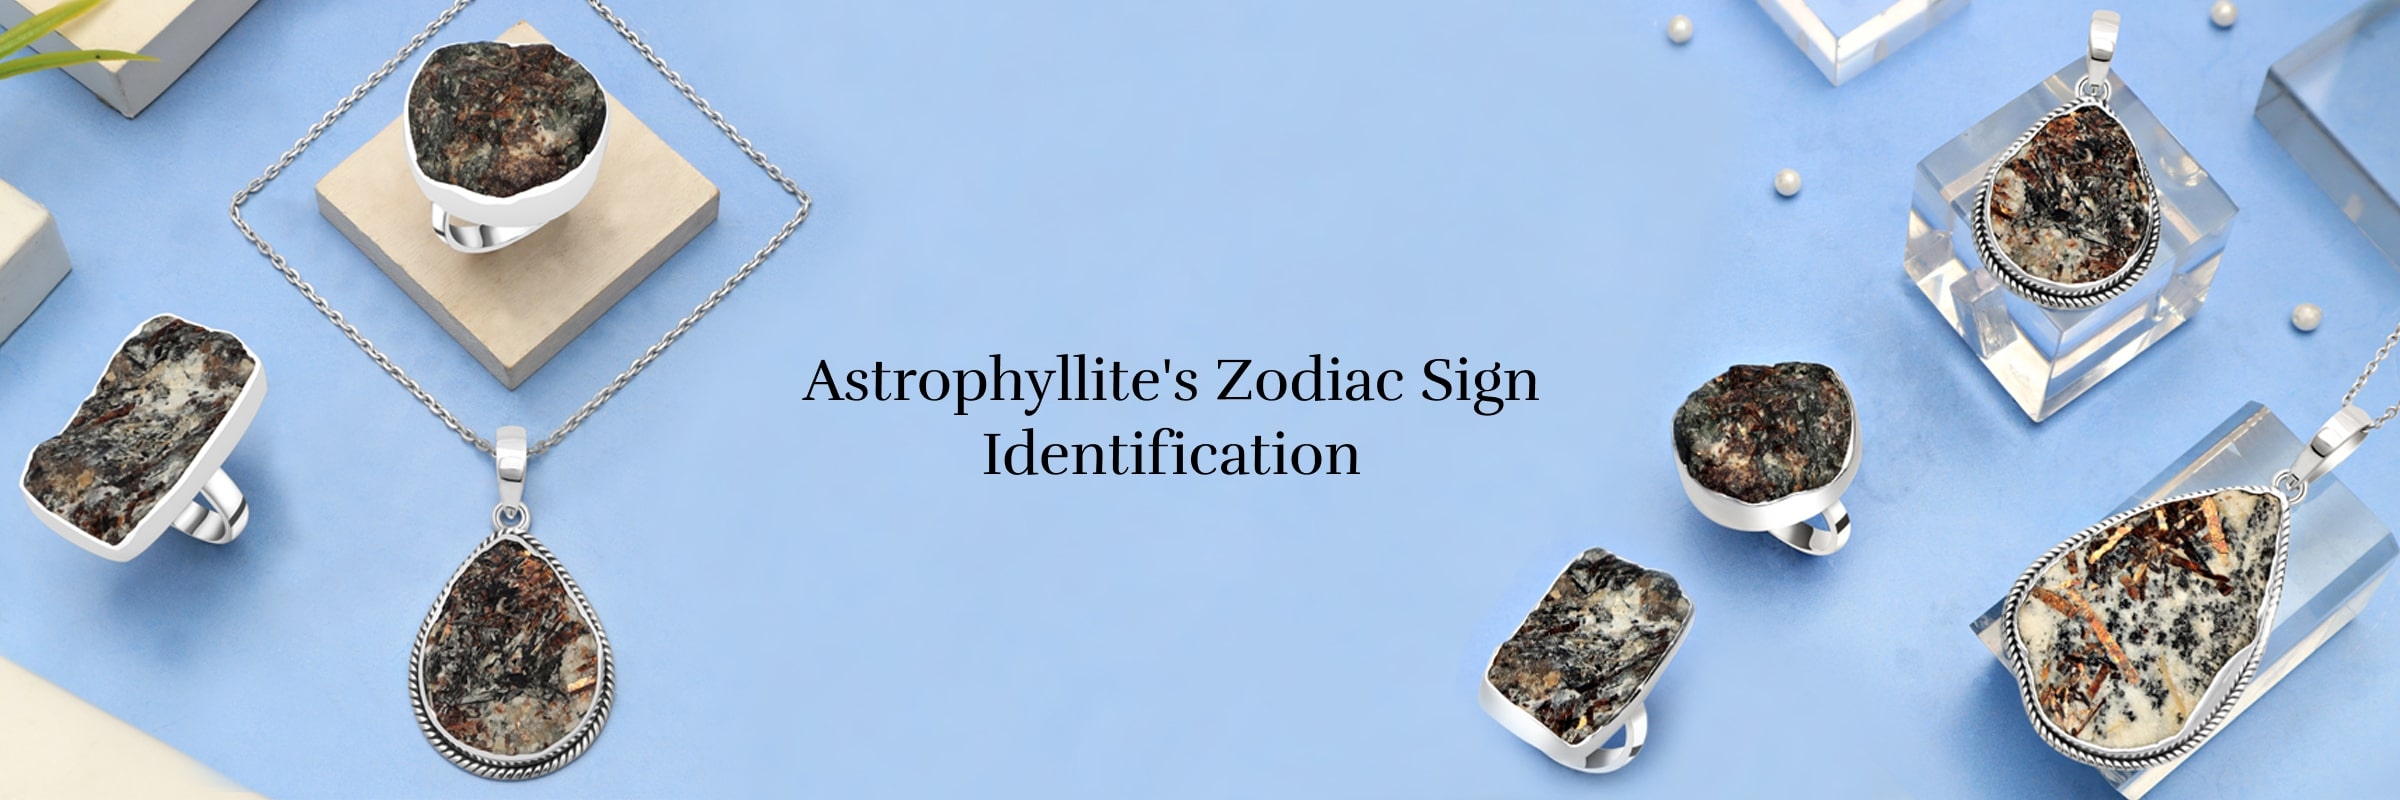 Astrophyllite is Associated with Which Zodiac Sign